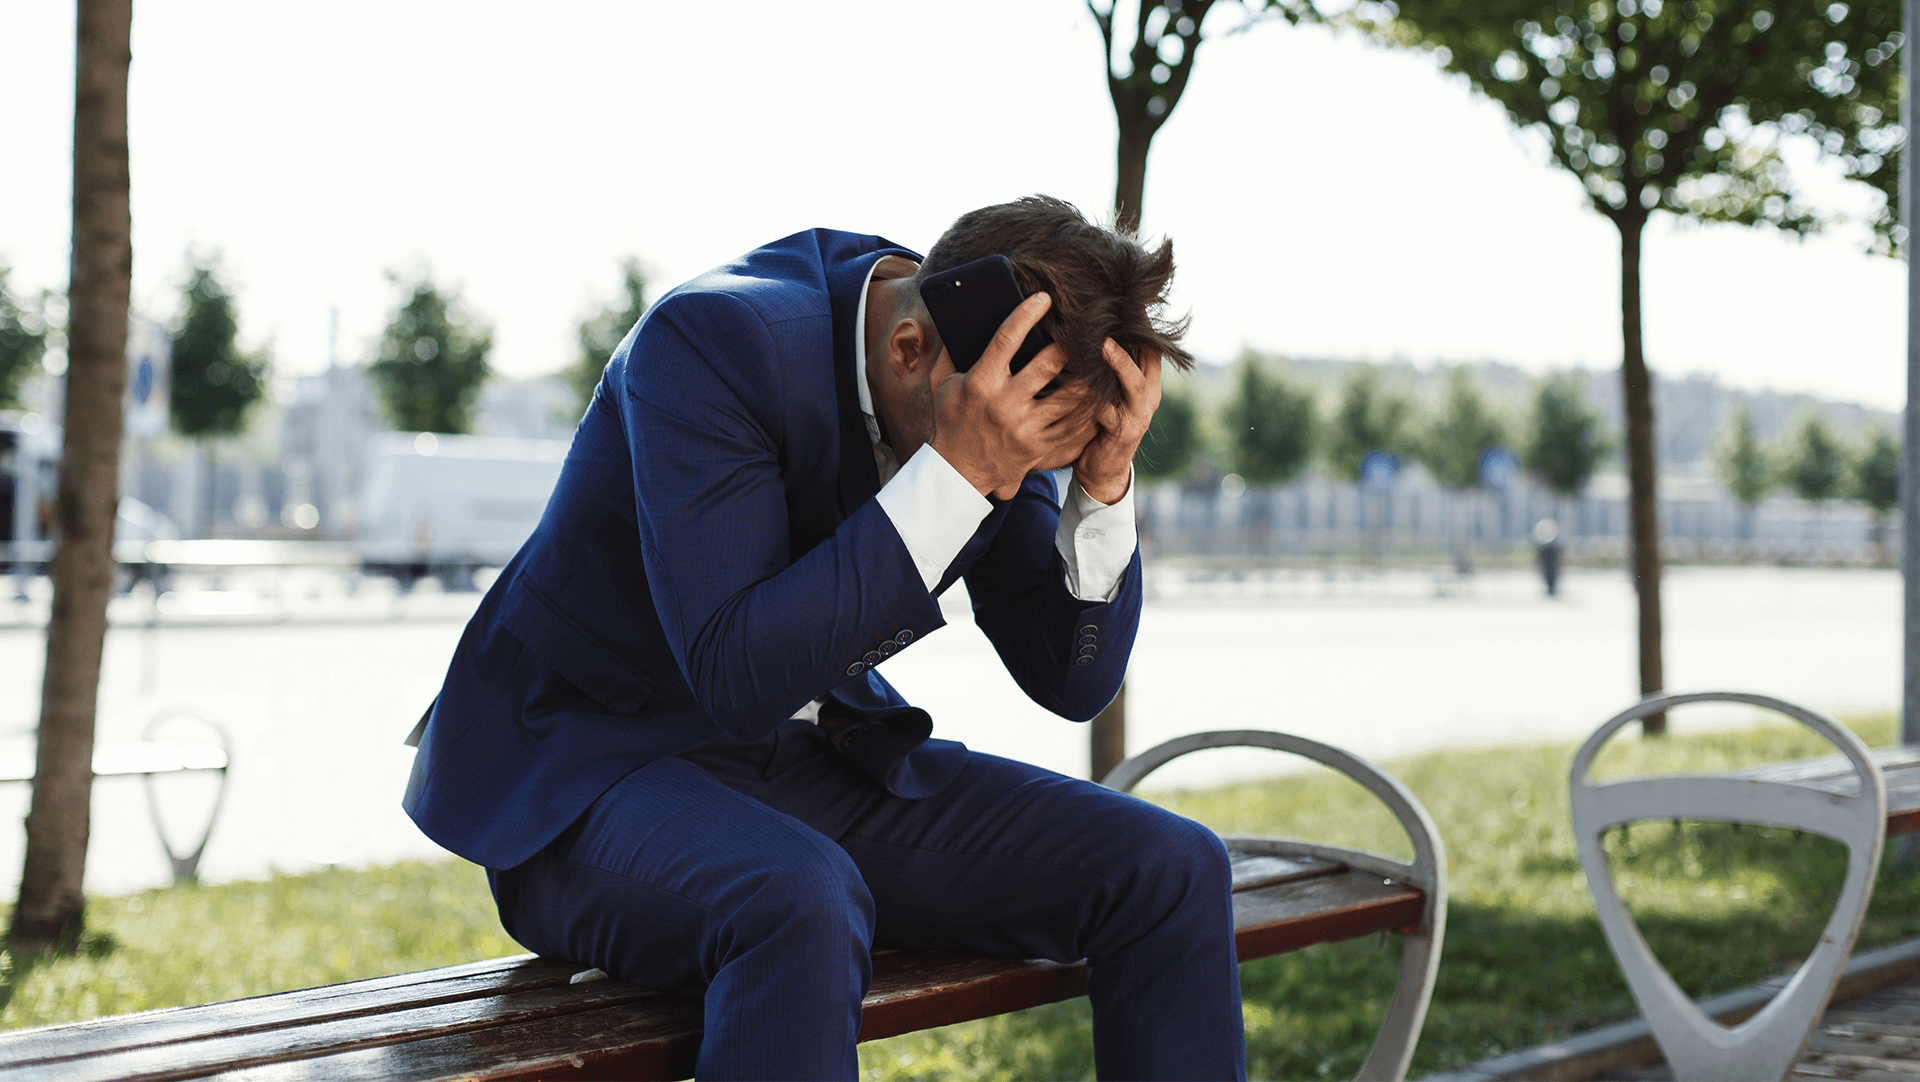 A businessman in a blue suit sitting on a park bench, looking stressed or upset while talking on his cellphone.